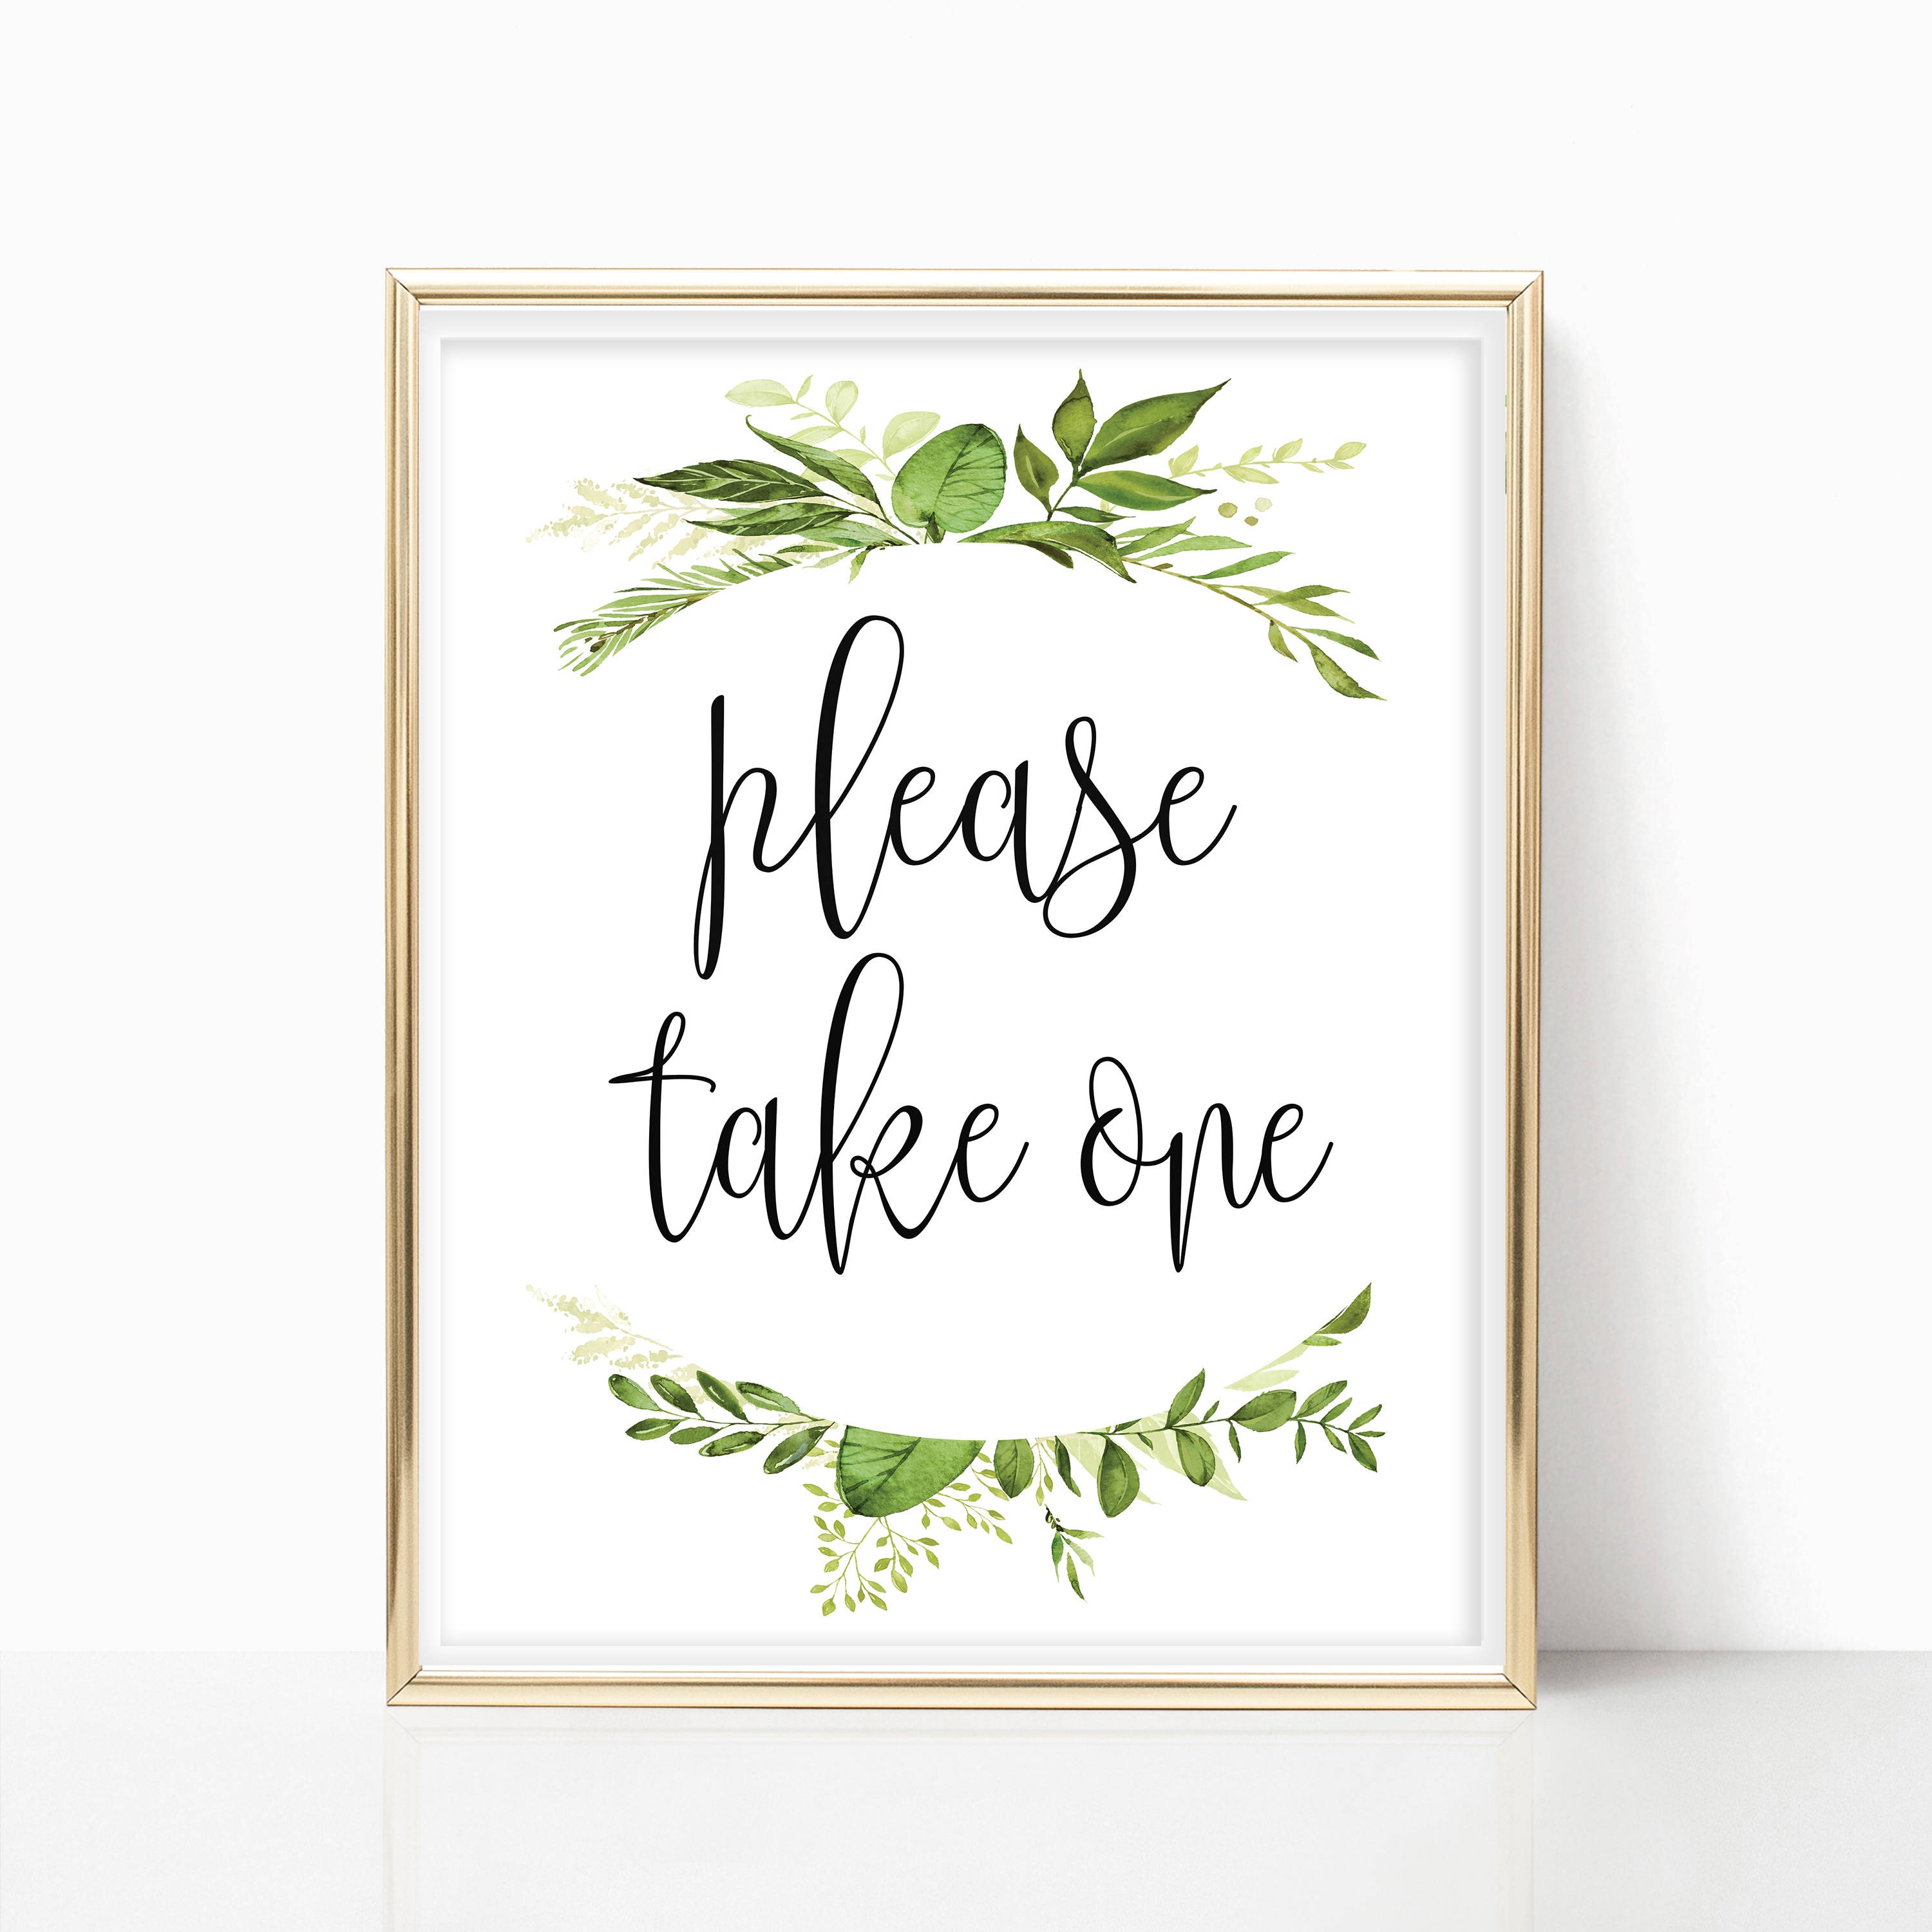 wedding gift sign wedding signage Our Gift To You Wedding Favor Printable Sign 8x10 please take one favor sign printable wedding sign